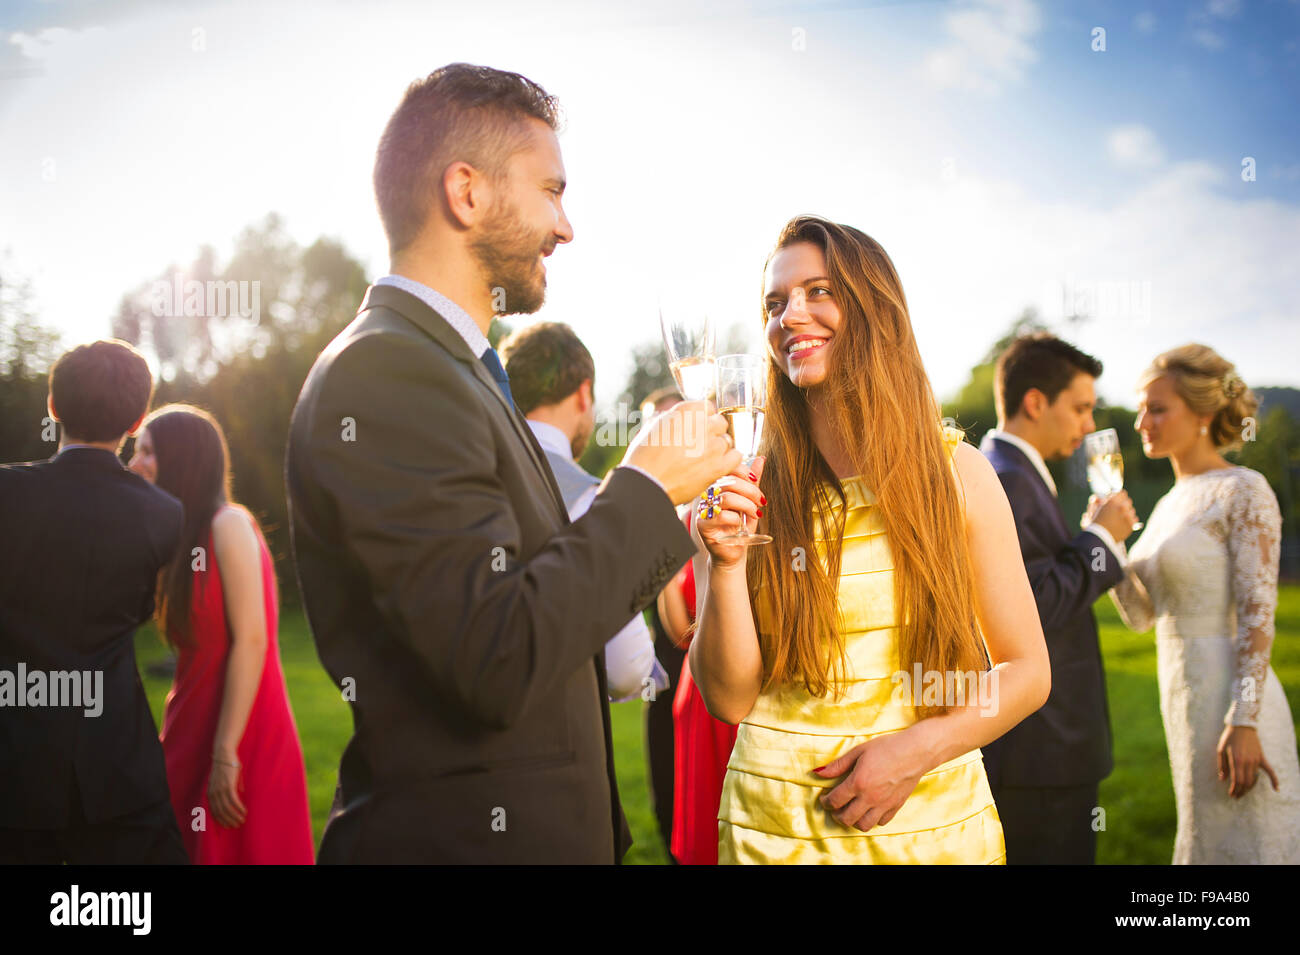 Wedding guests clinking glasses at the wedding reception outside Stock Photo